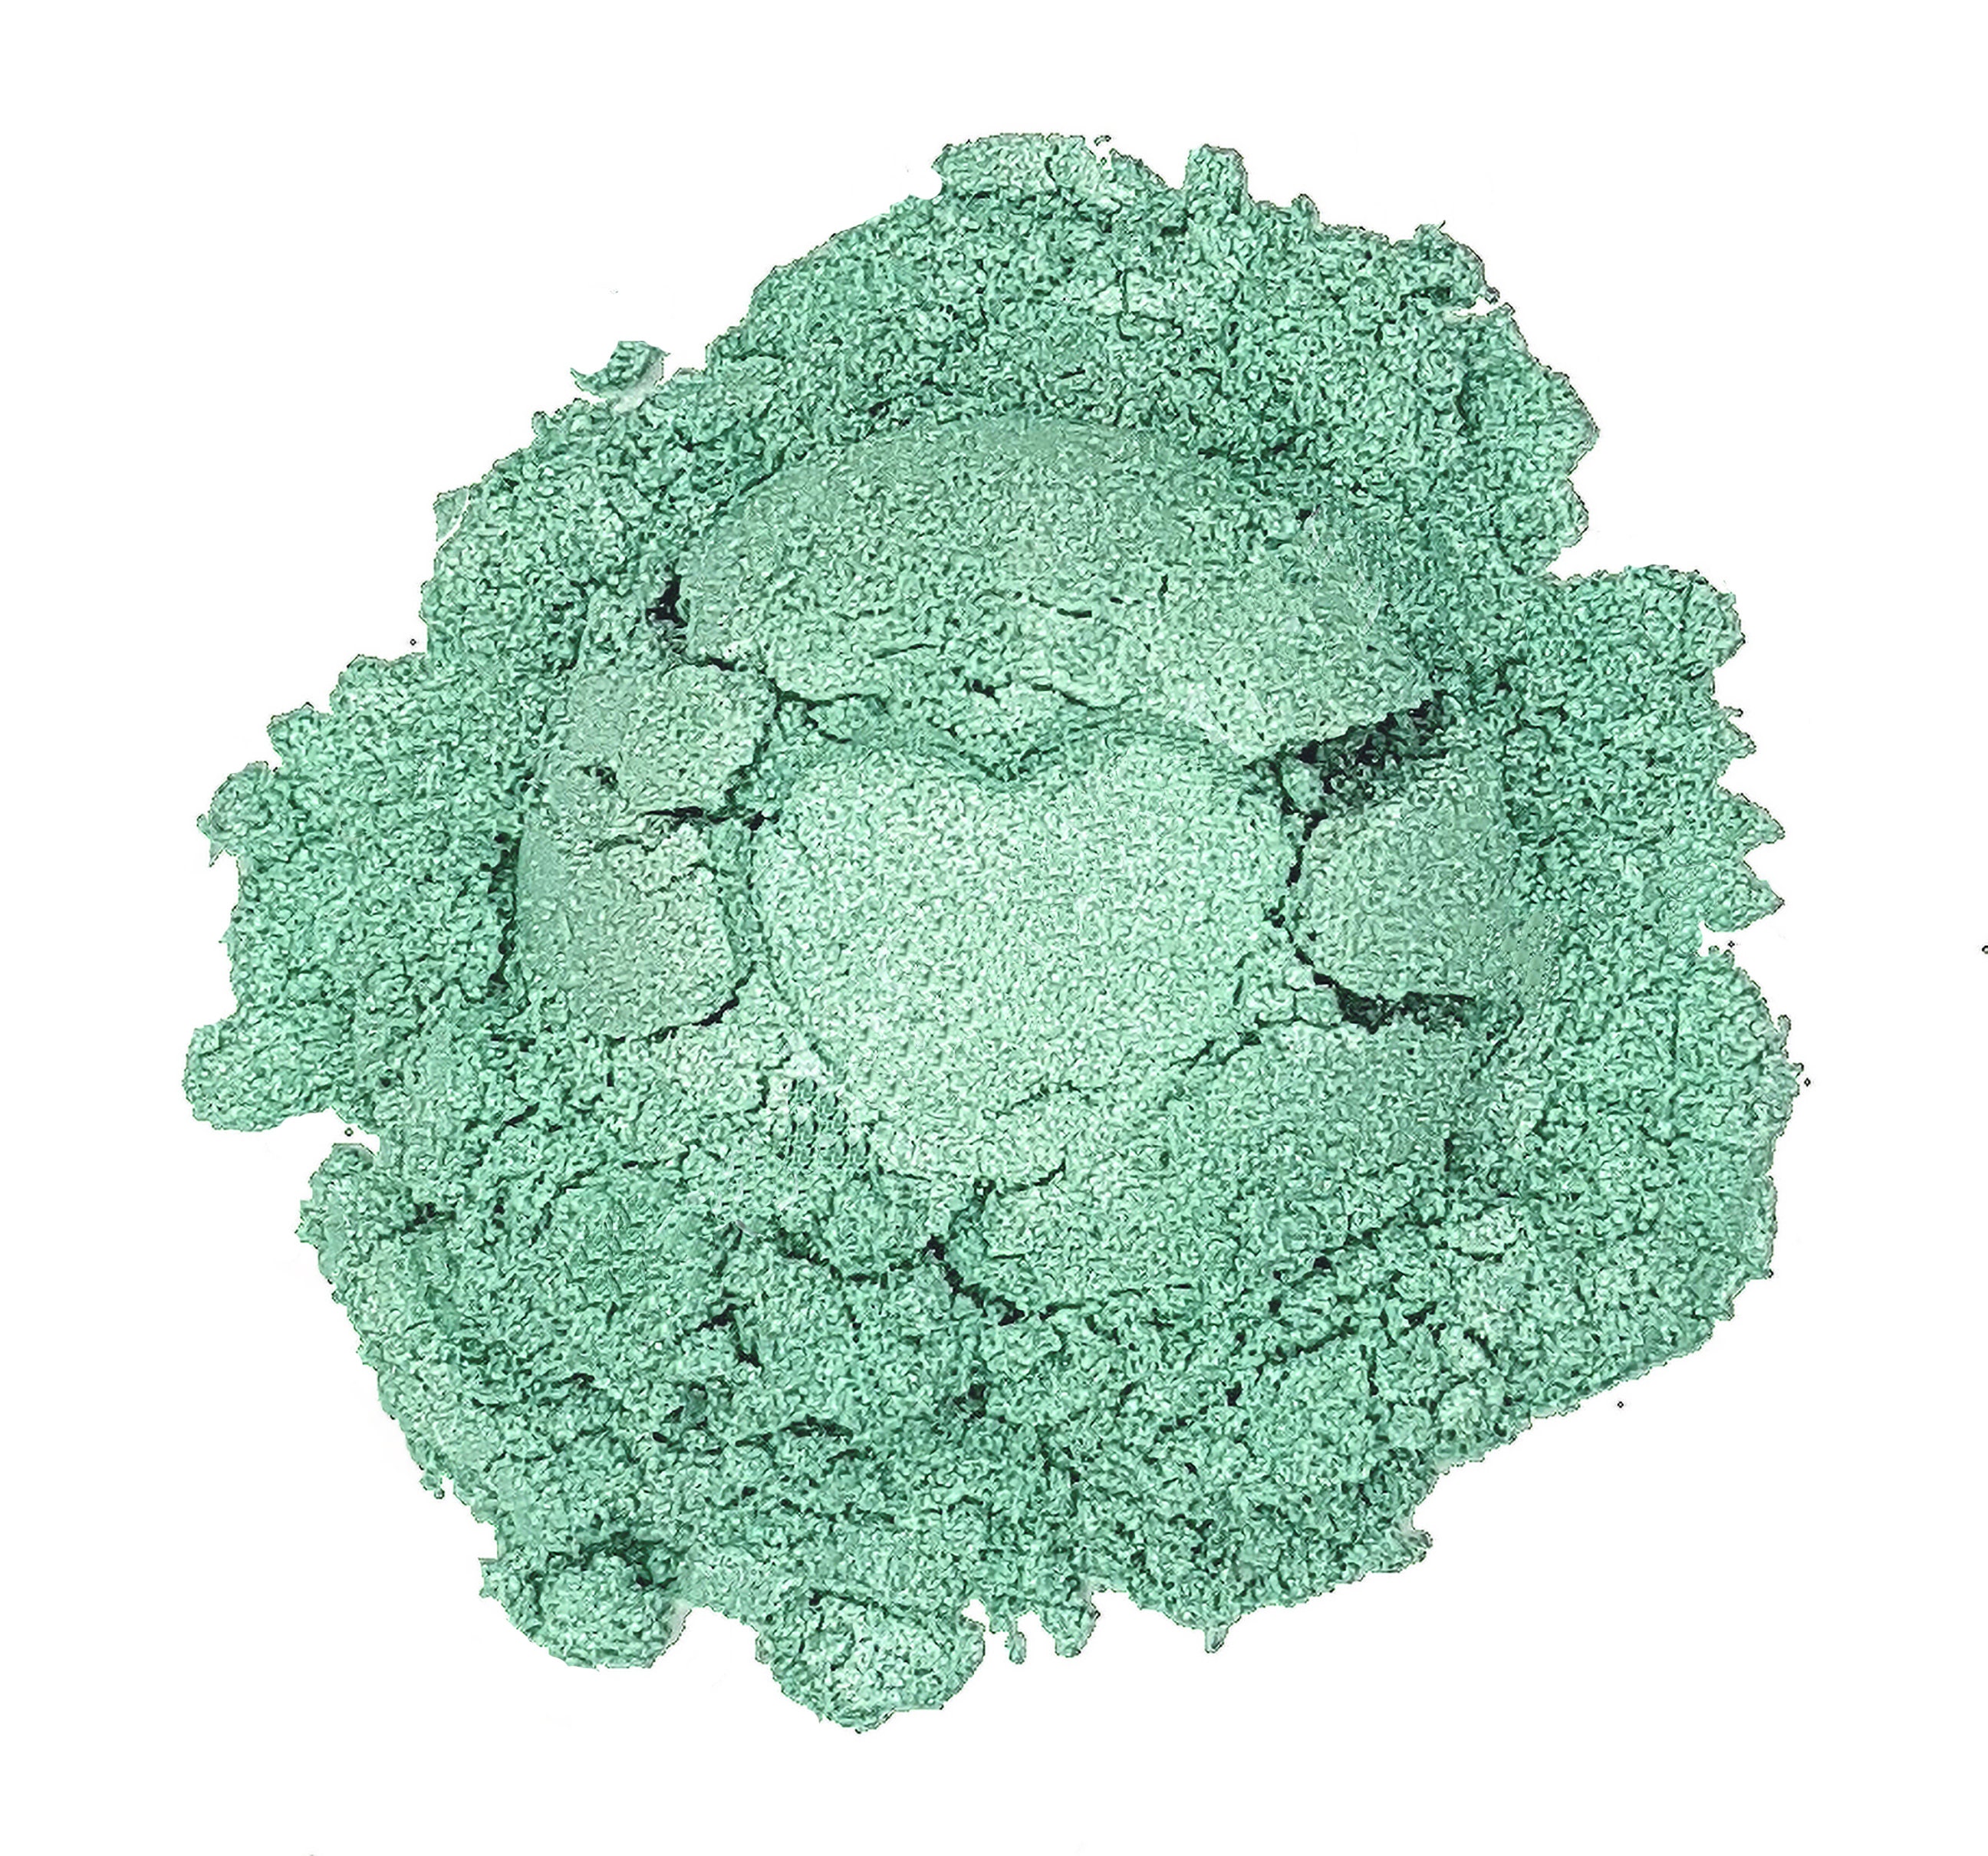 Pearlescent Pigment, Mica Powder for Shiny Cosmetic Creations, Non-Toxic,  Skin Safe